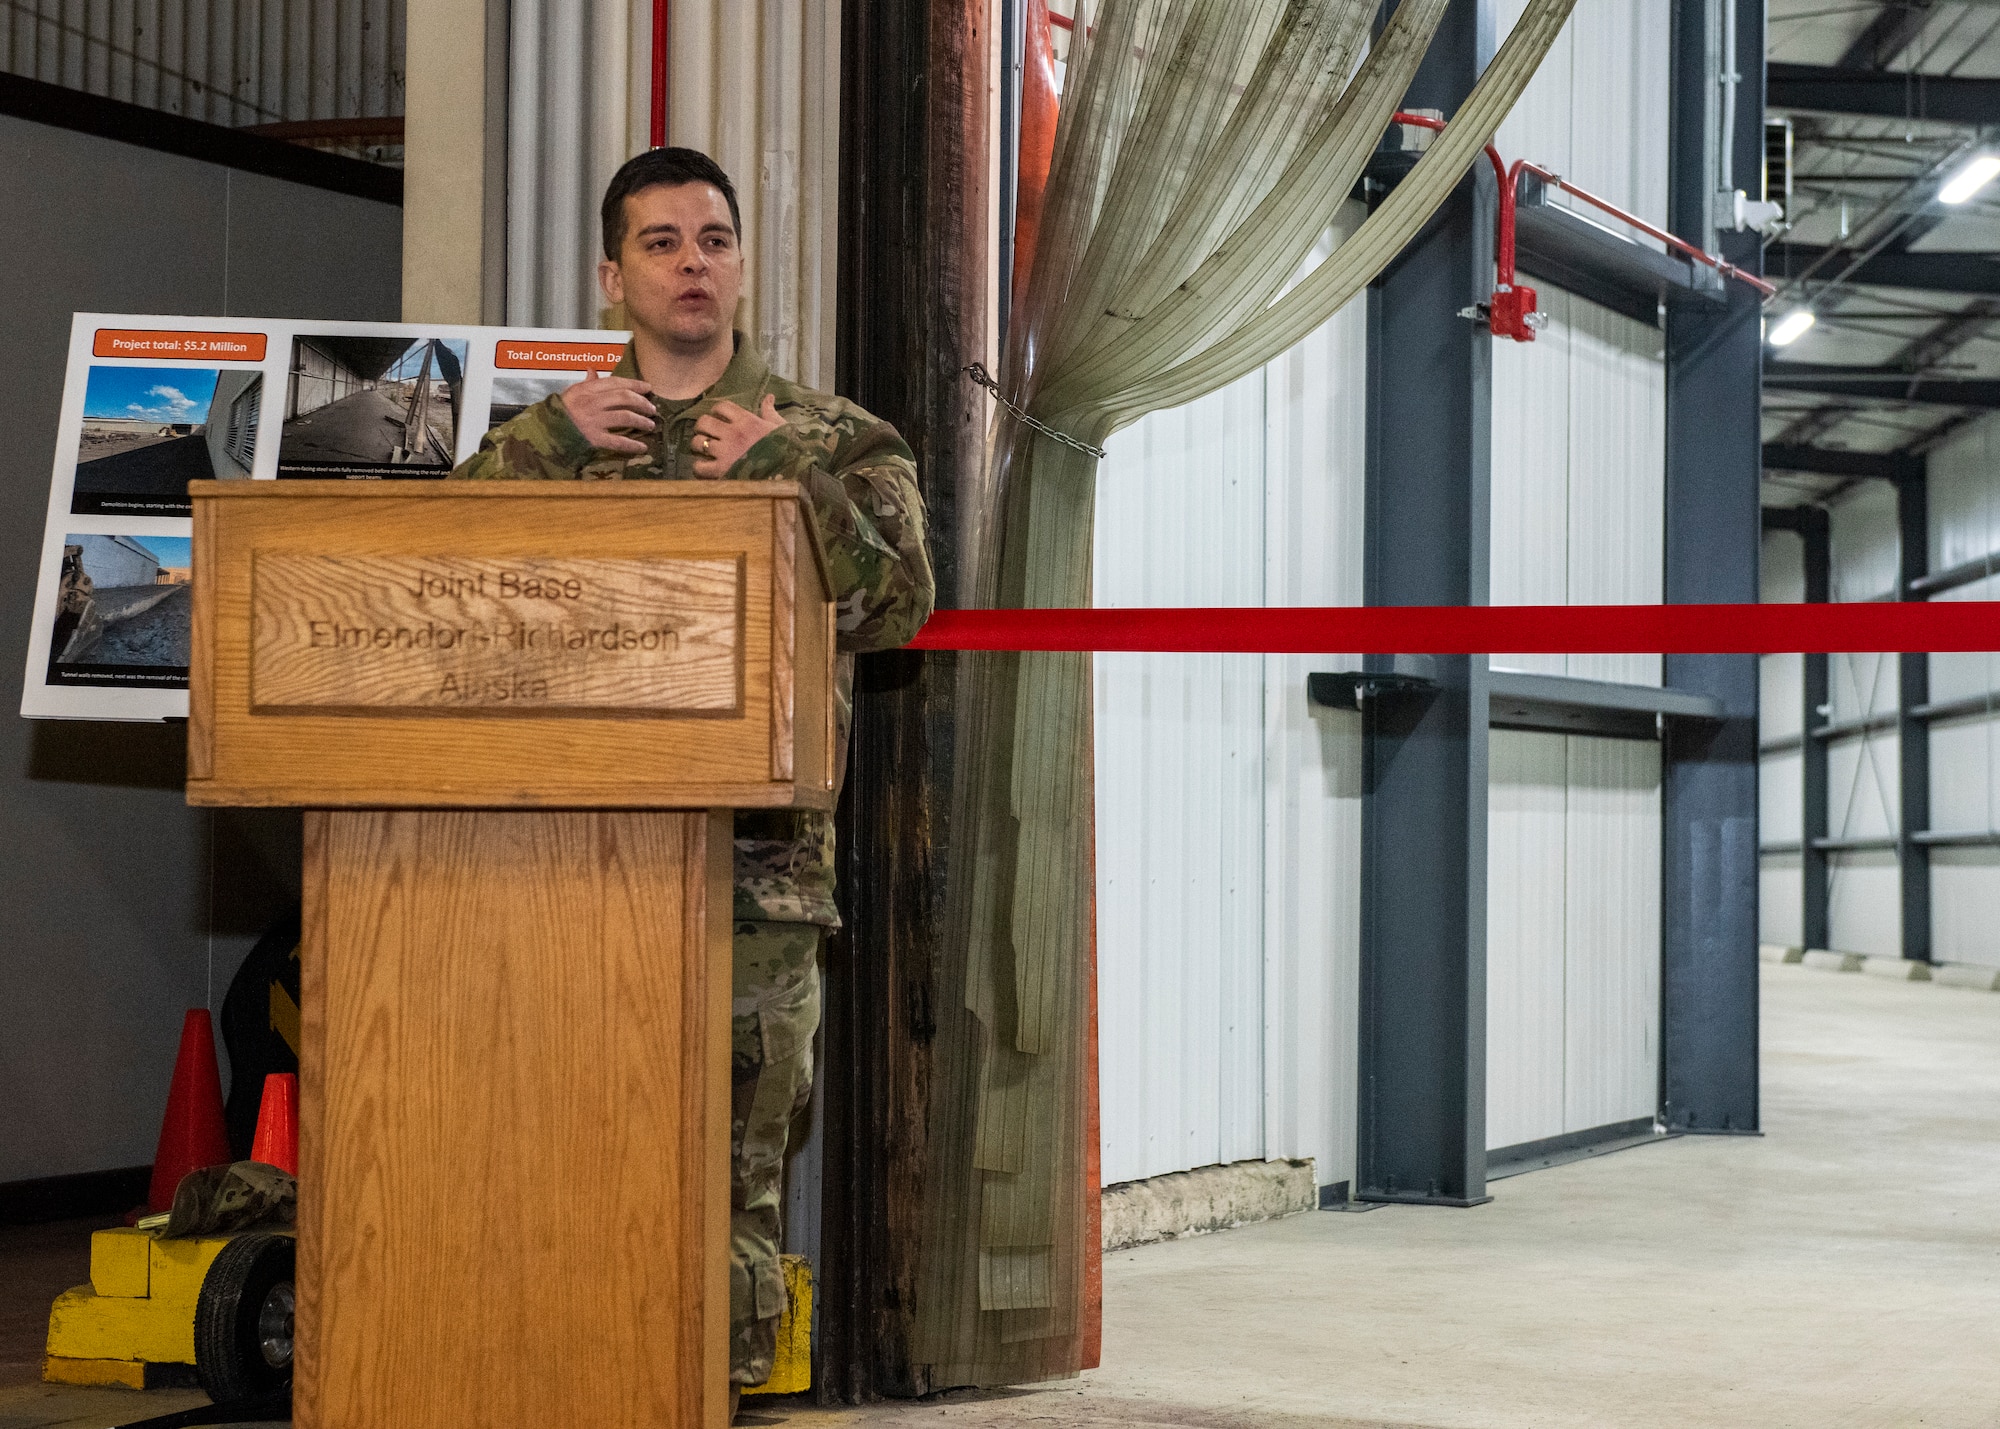 U.S. Air Force Col. David Wilson, Joint Base Elmendorf-Richardson and 673d Air Base Wing commander, speaks at the opening of a supply tunnel at Joint Base Elmendorf-Richardson, Alaska, Feb. 3, 2023. The $5.2 million project was designed to ease the warehousing and distribution of assets between the 673d Logistics Readiness Group and the 673d Medical Group, providing the ability to transport supplies and equipment from one warehouse to another without delay. (U.S. Air Force photo by Airman 1st Class Moises Vasquez)